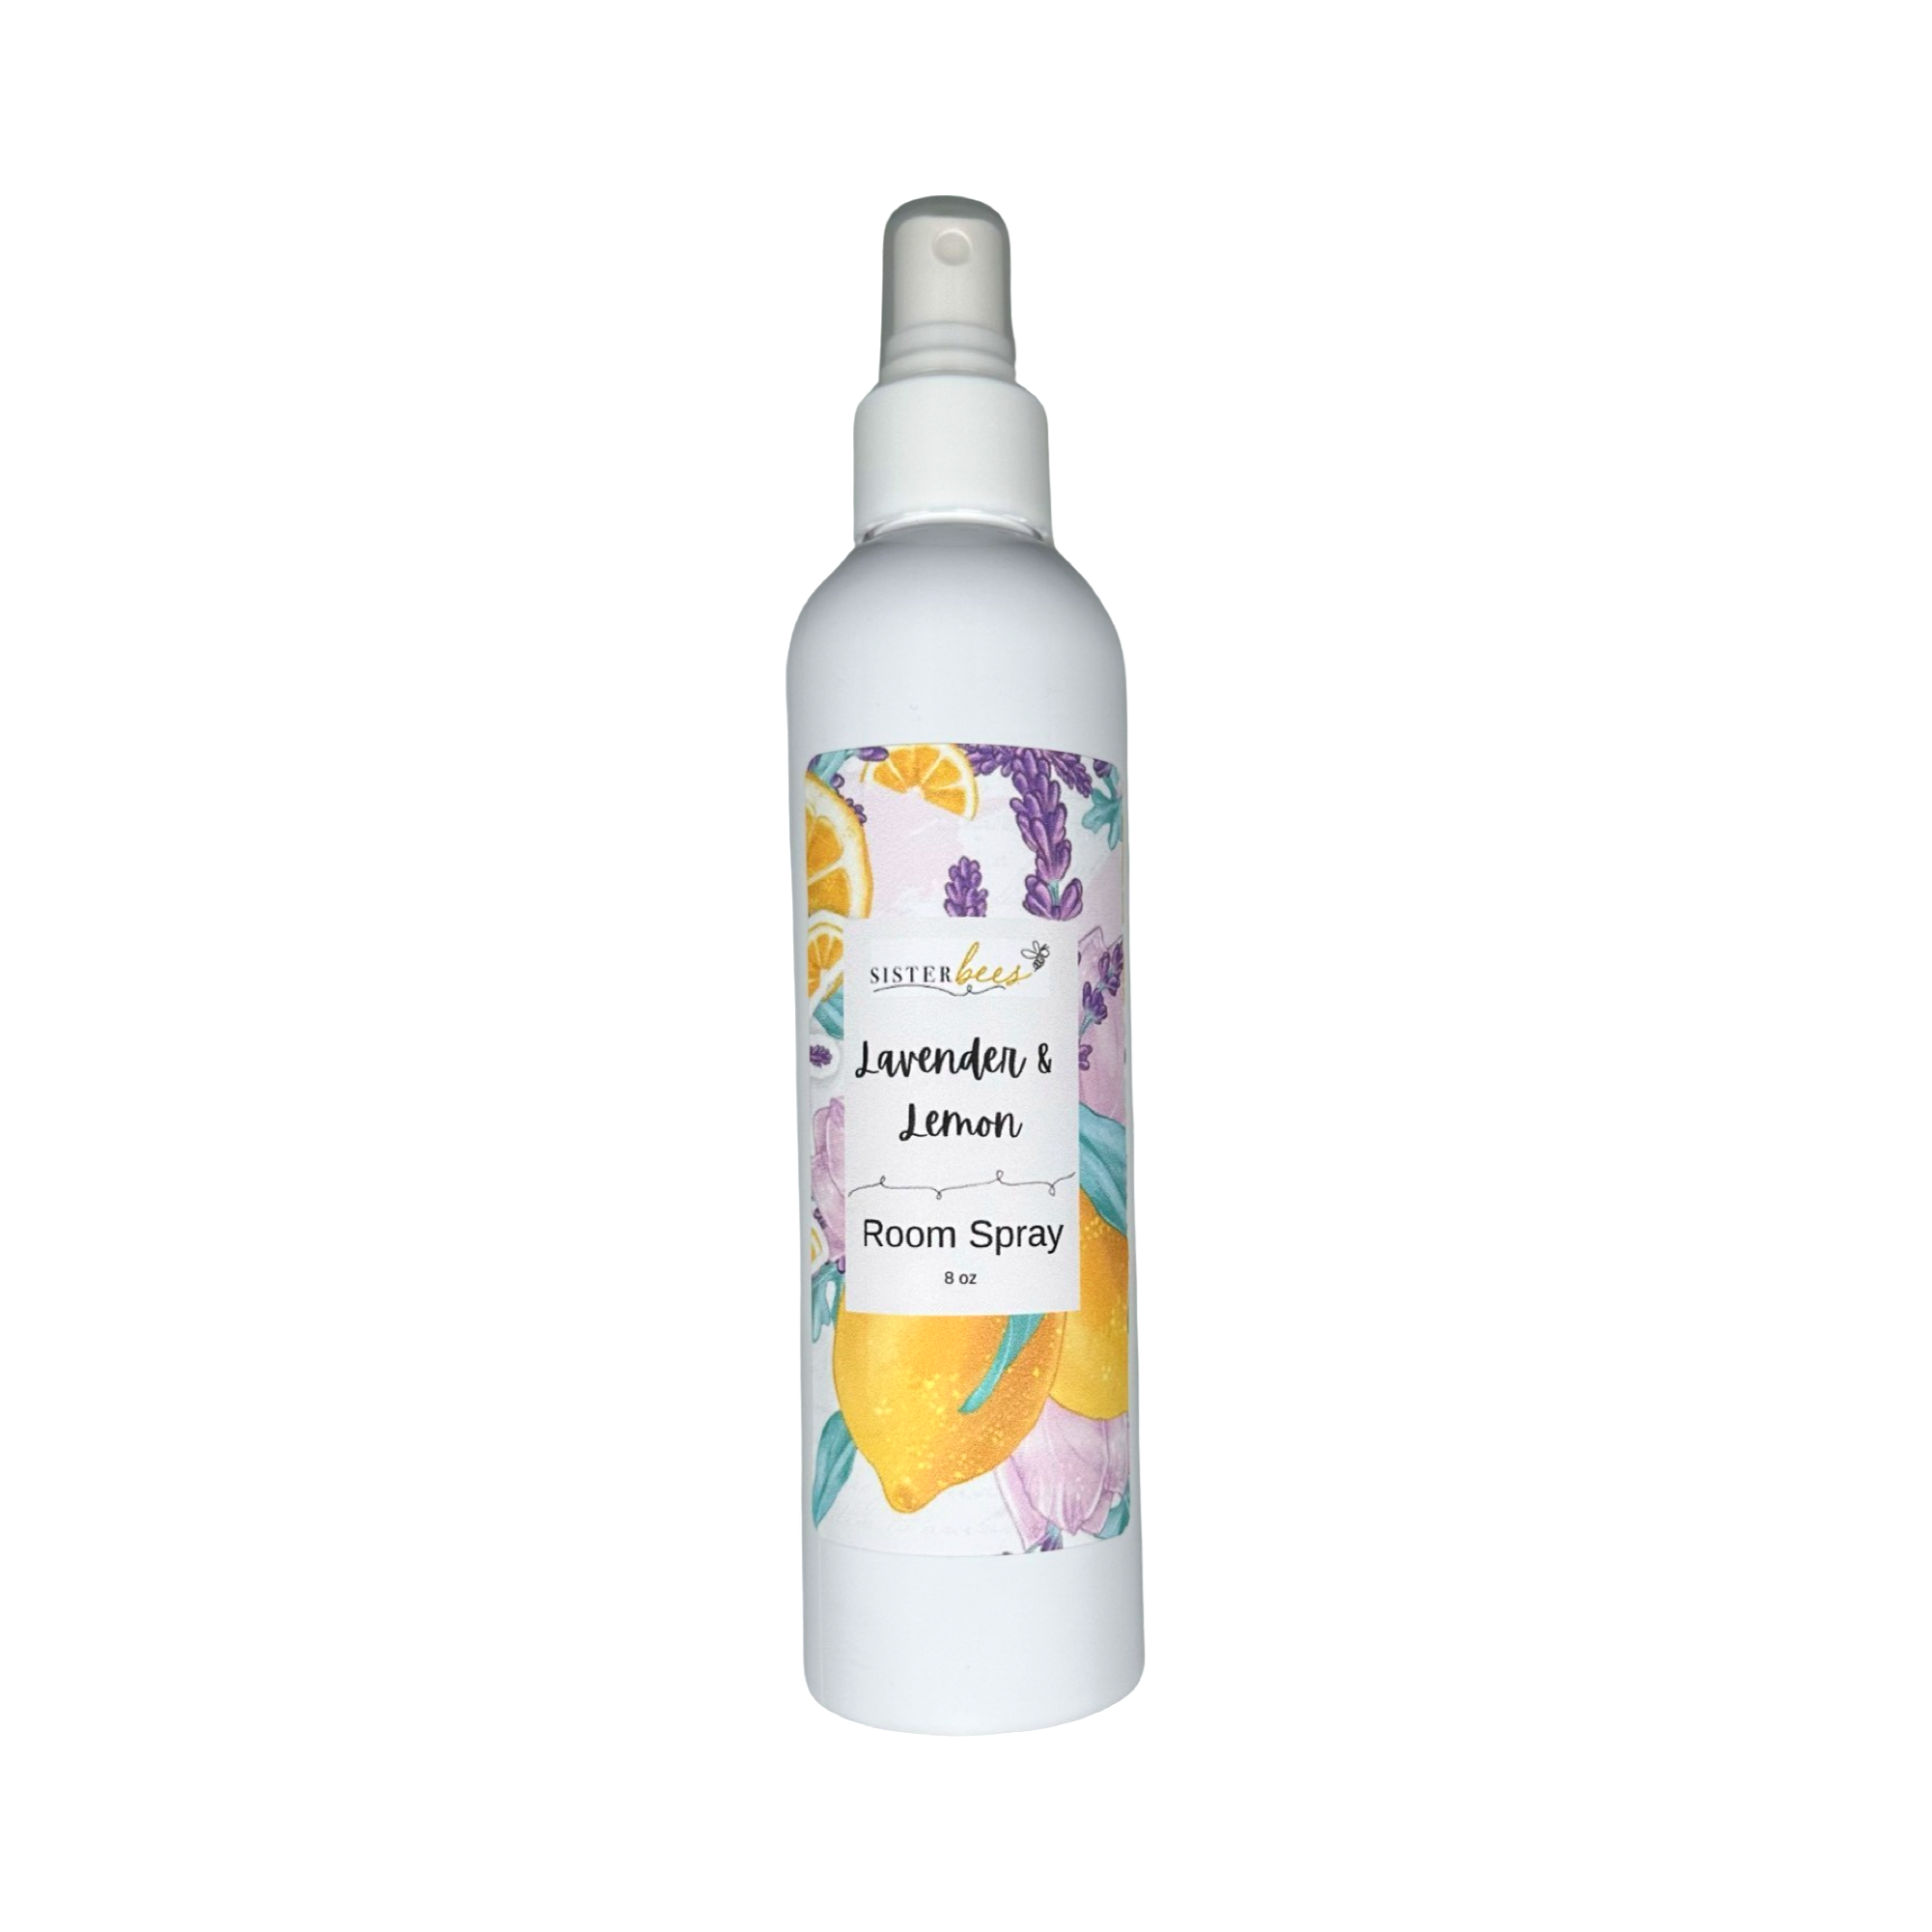 ROOM SPRAY (lavender, lemon, and a touch of honey!)